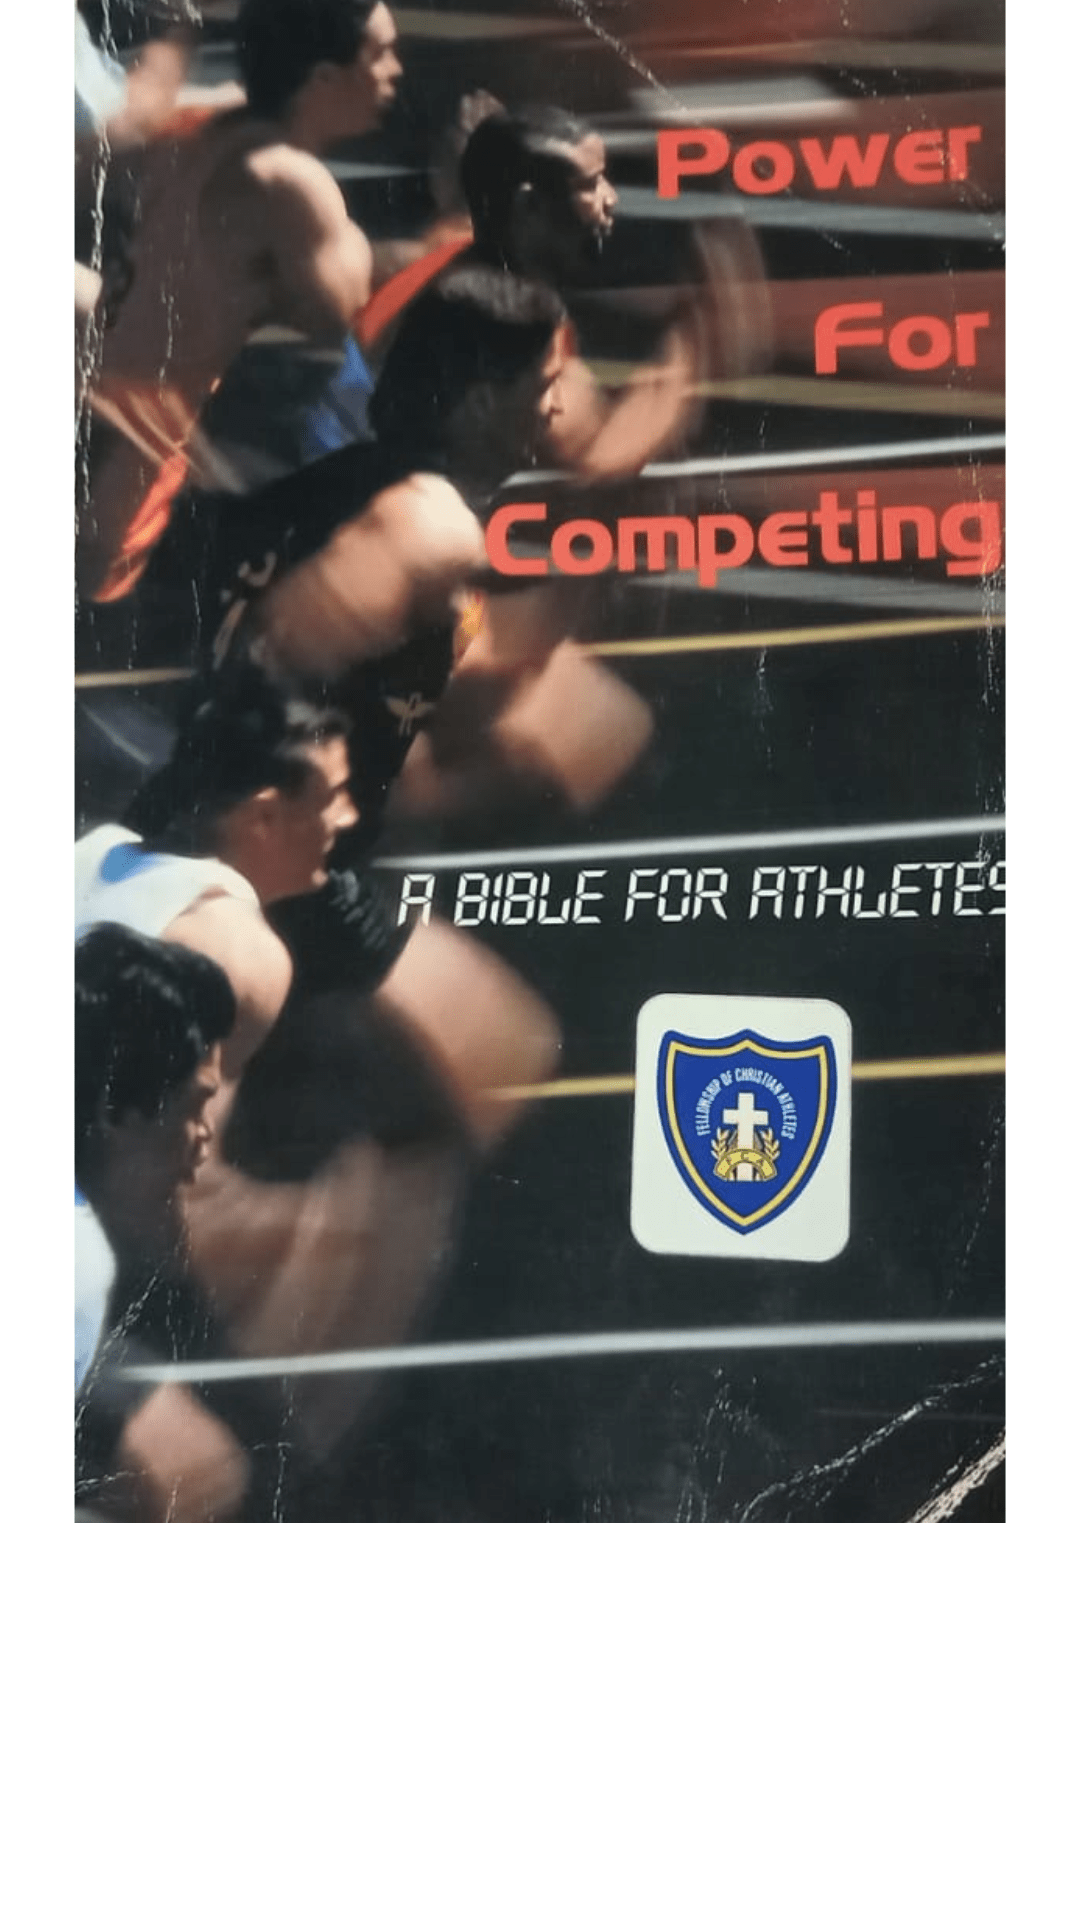 Power for Competing; A Bible for Athletes